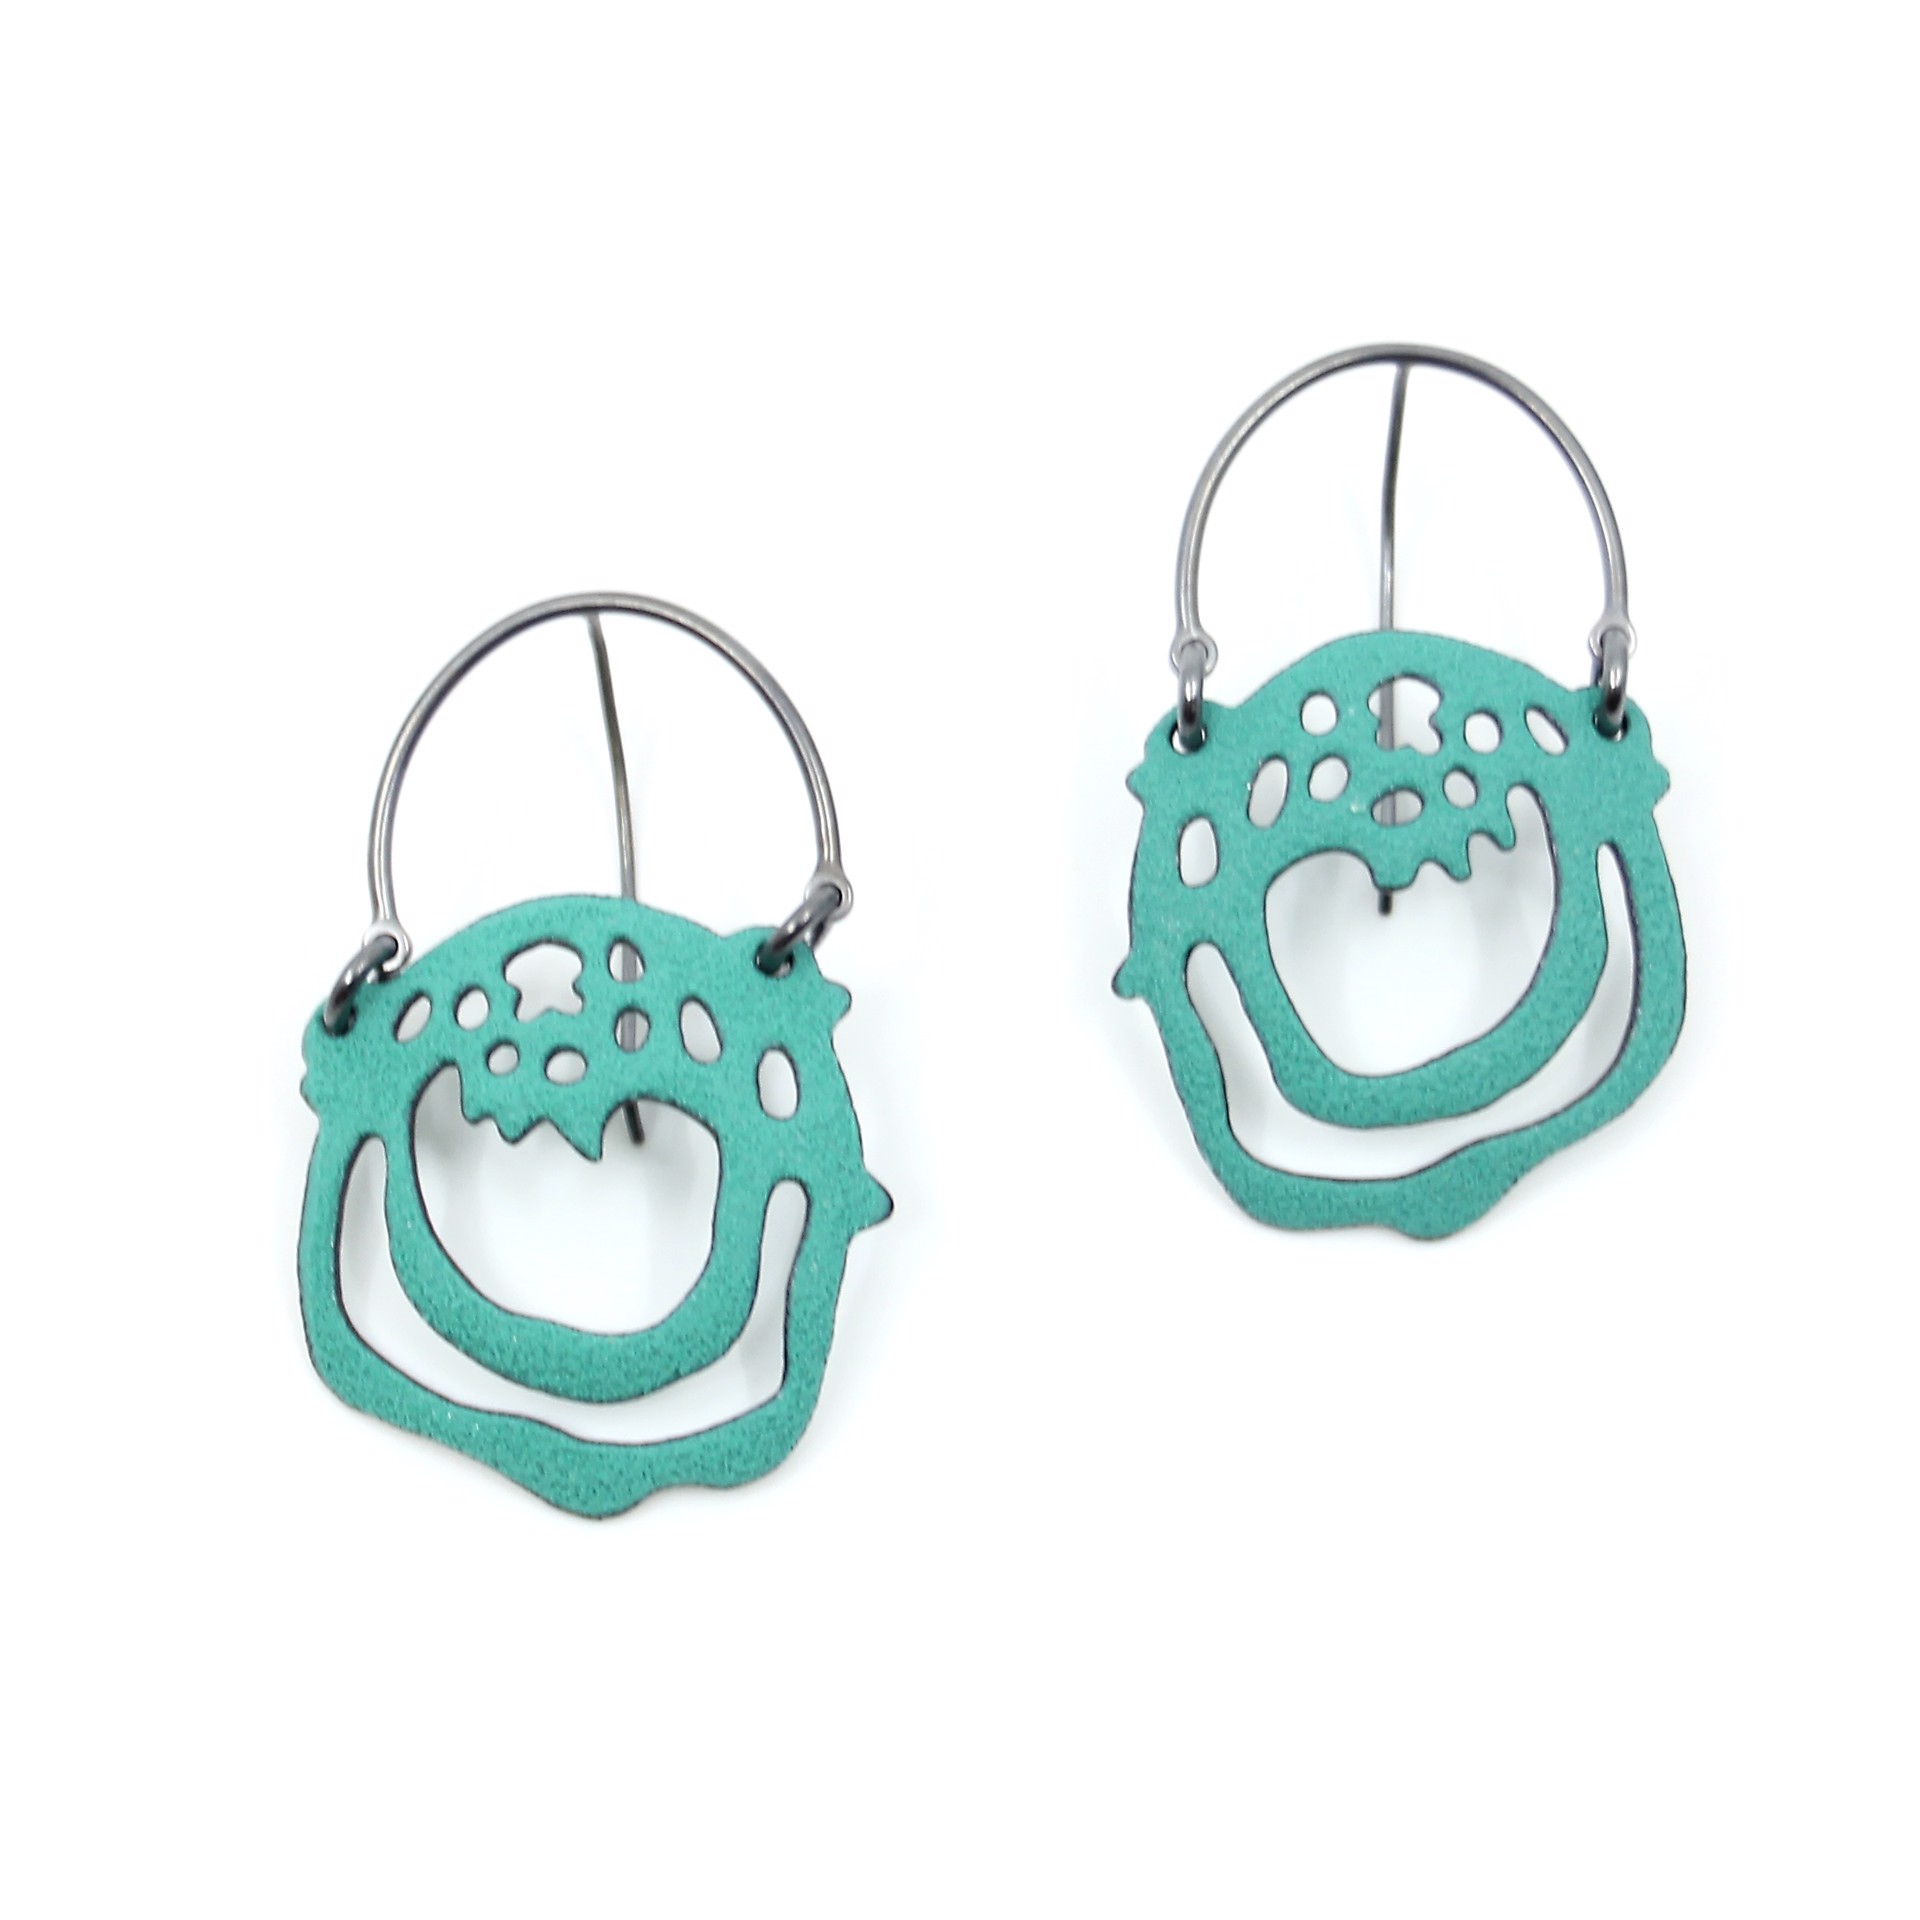 Round Cell Earrings by Joanna Nealey